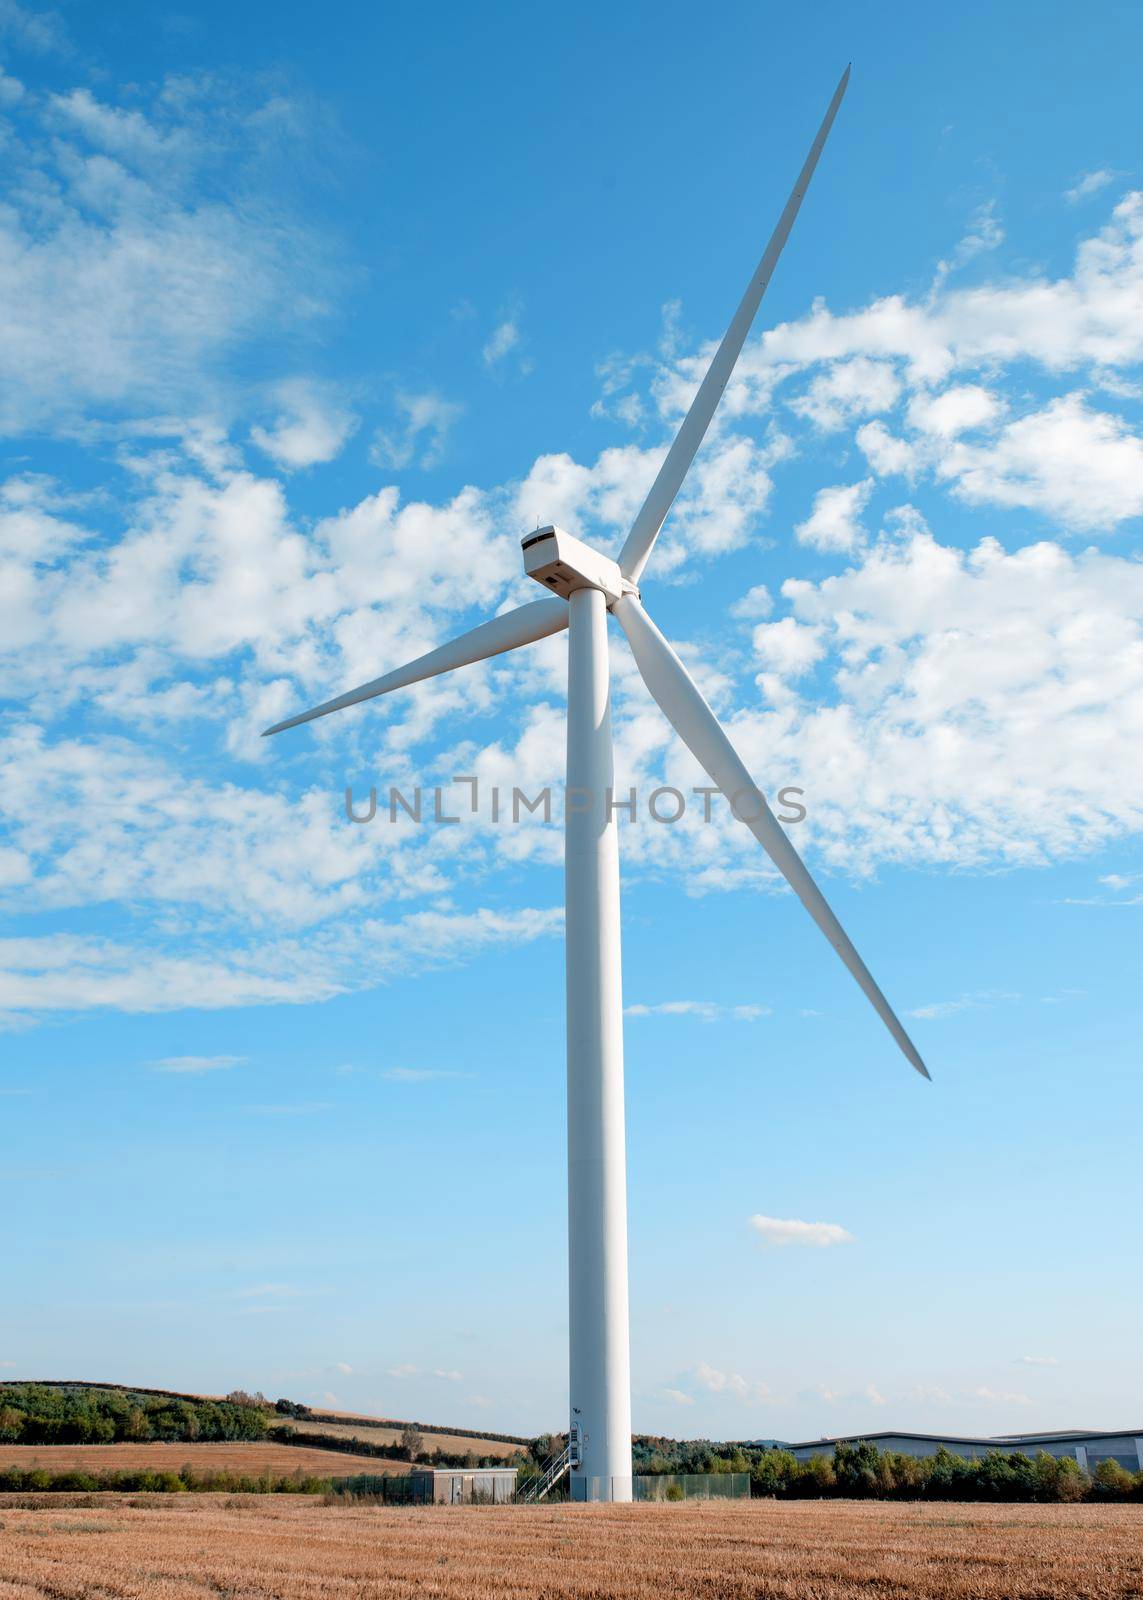 wind turbine in the field against blue sky on sunny day